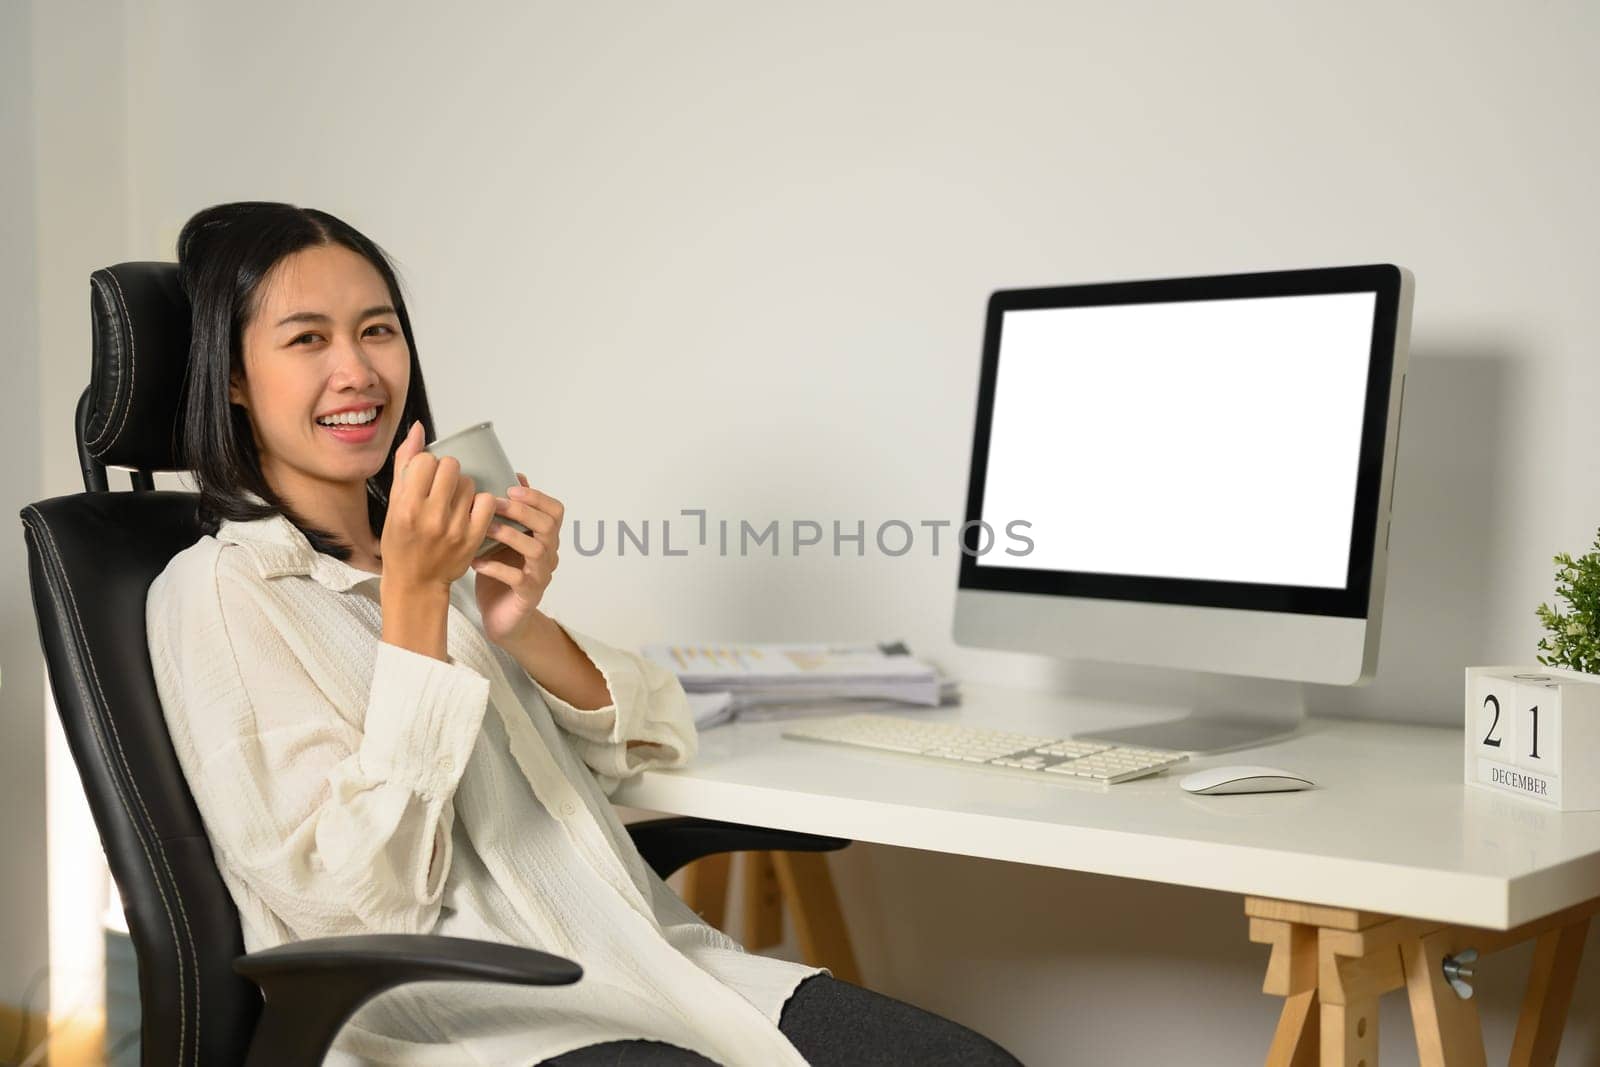 Young businesswoman with mug sitting in front of blank computer screen.